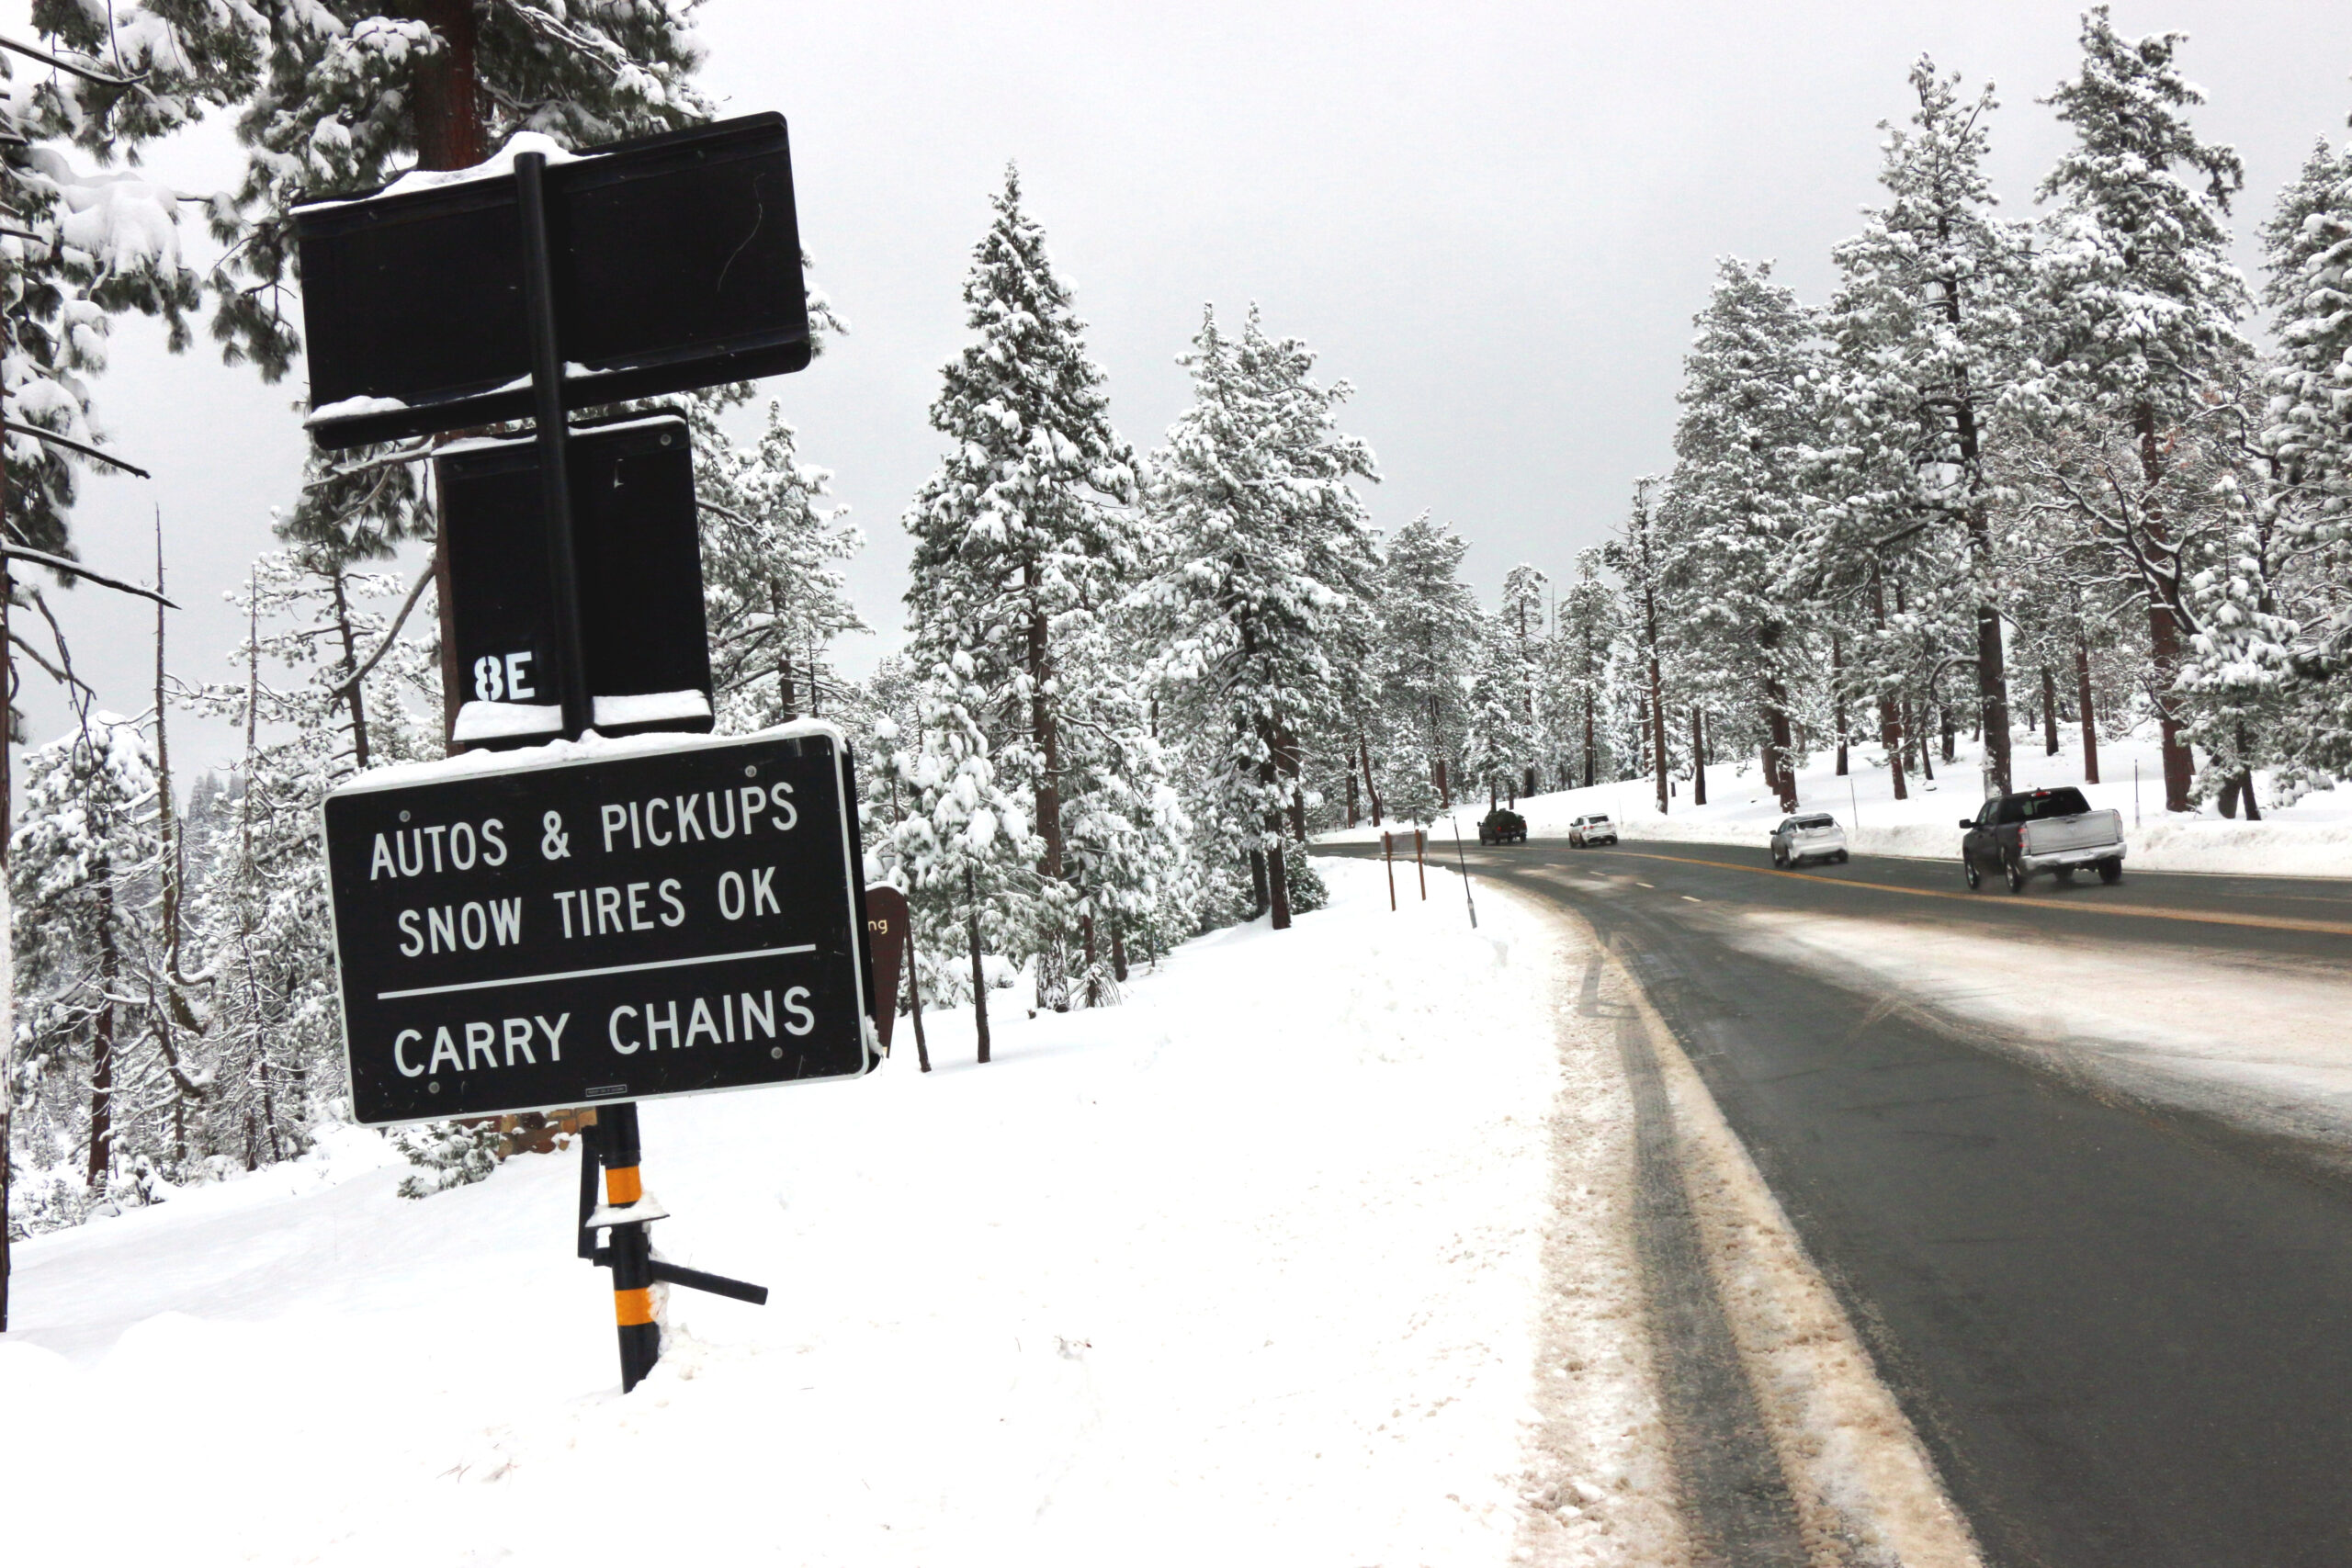 highway snow chains required for RVs?